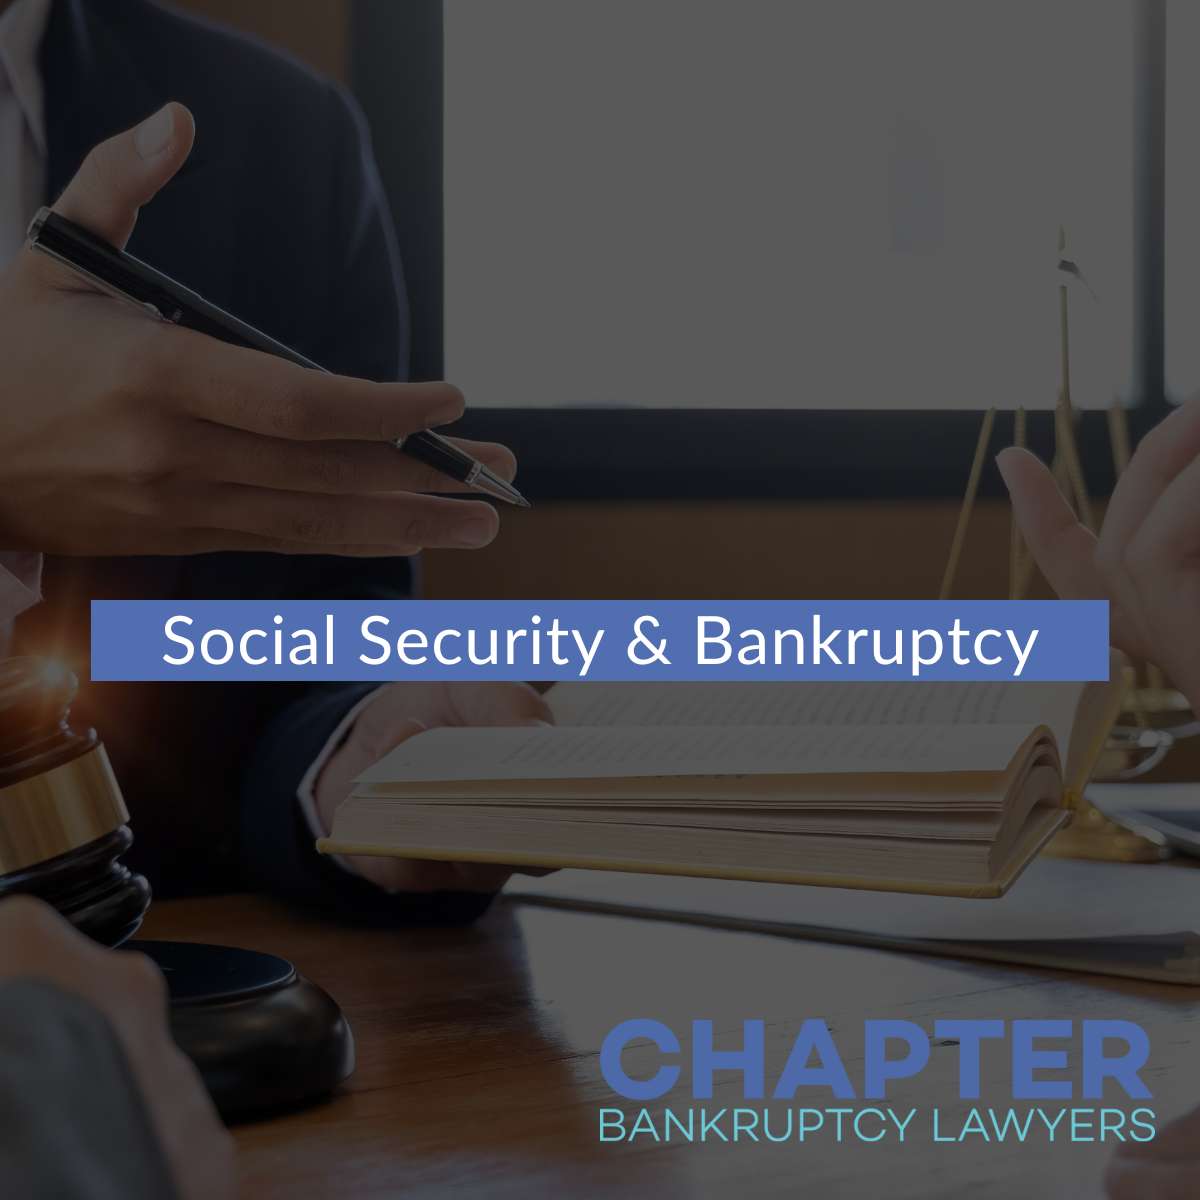 Social Security & Bankruptcy